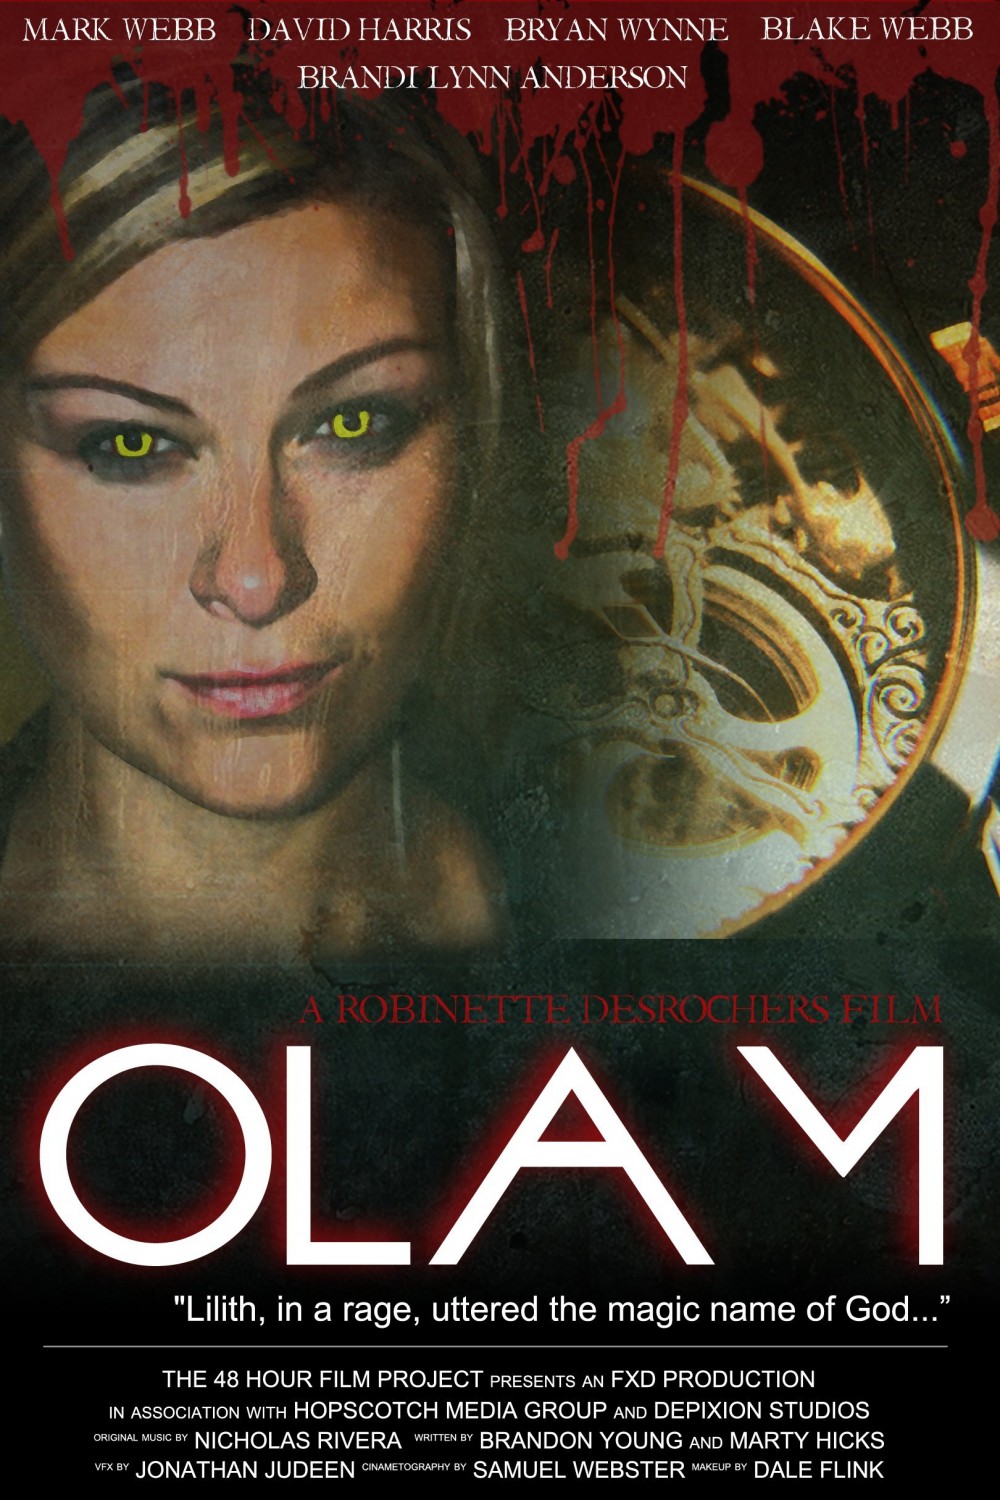 Extra Large Movie Poster Image for Olam